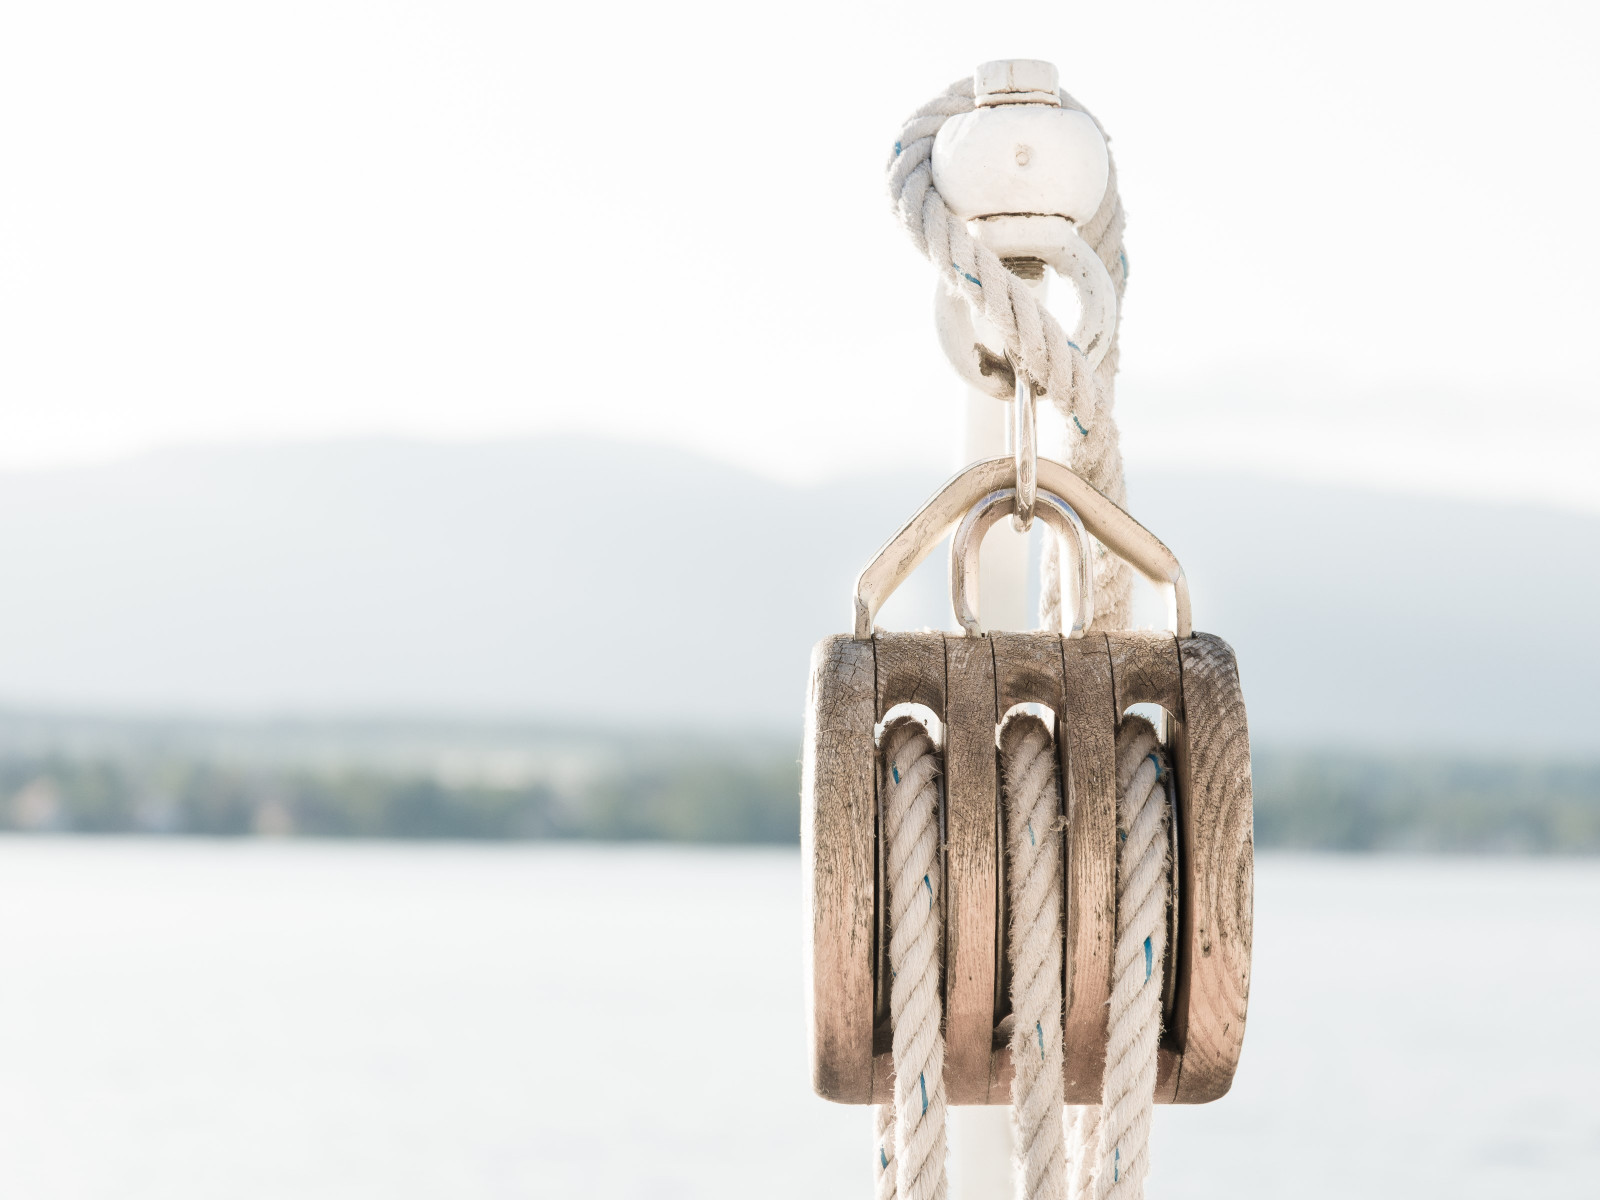 Pulley on a boat wallpaper 1600x1200